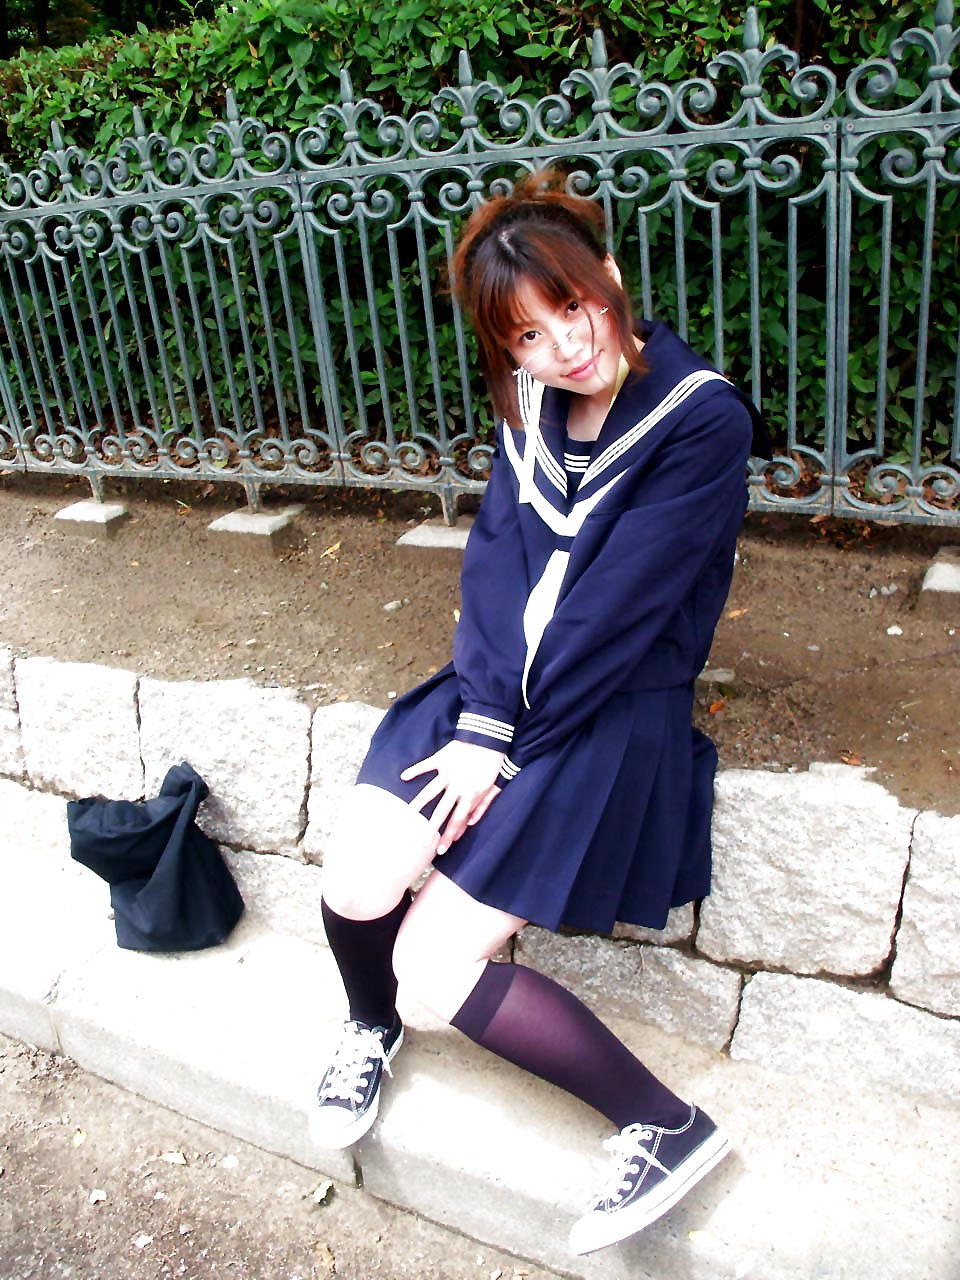 Japanese Girls Collection 93 adult photos